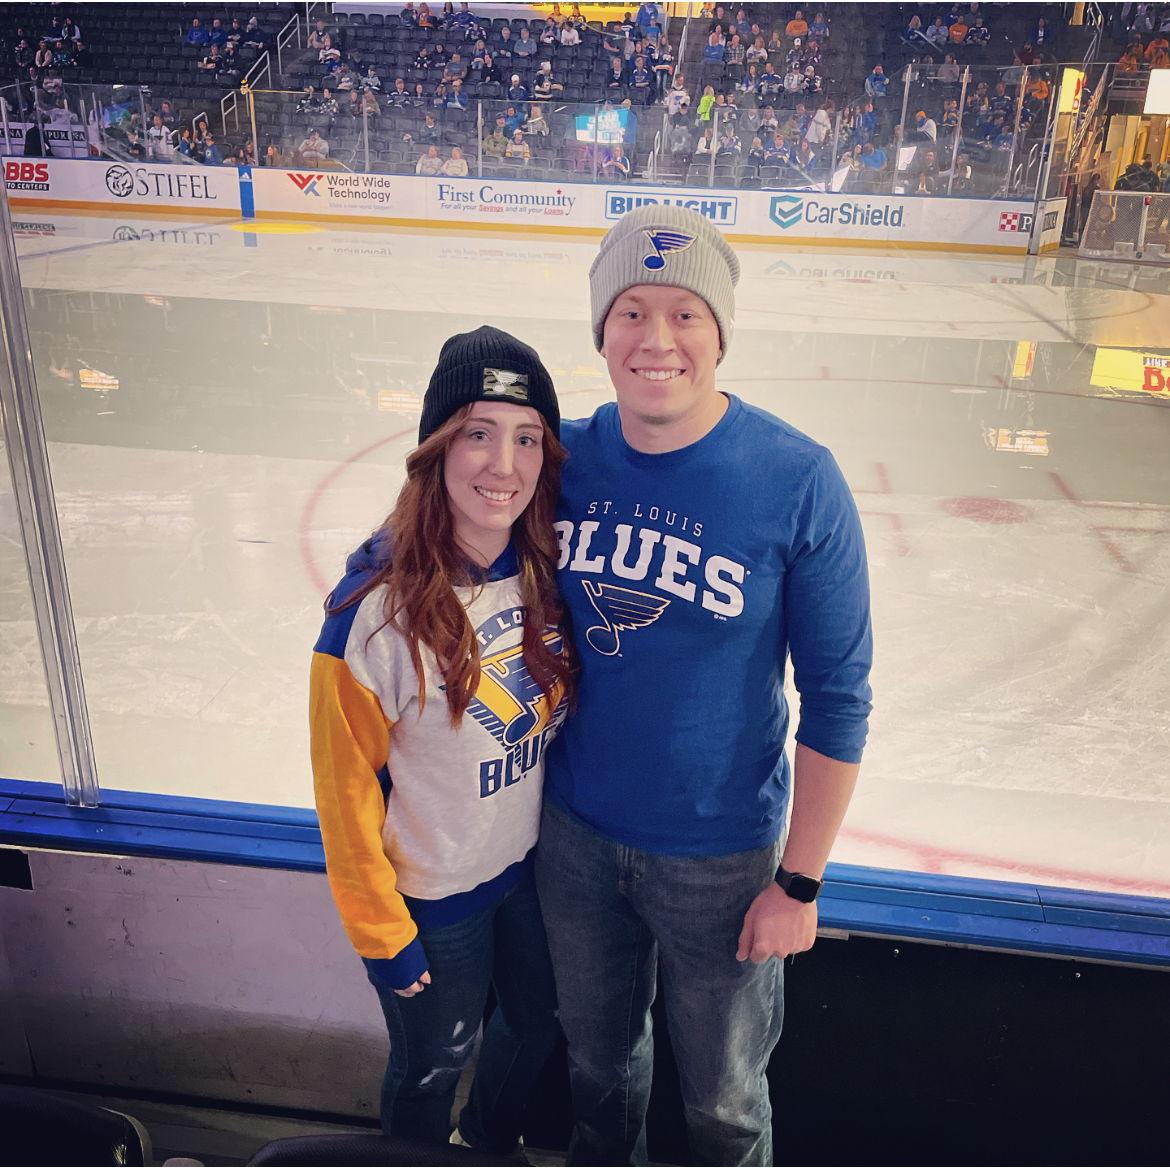 St. Louis Blues game for me 30th birthday!